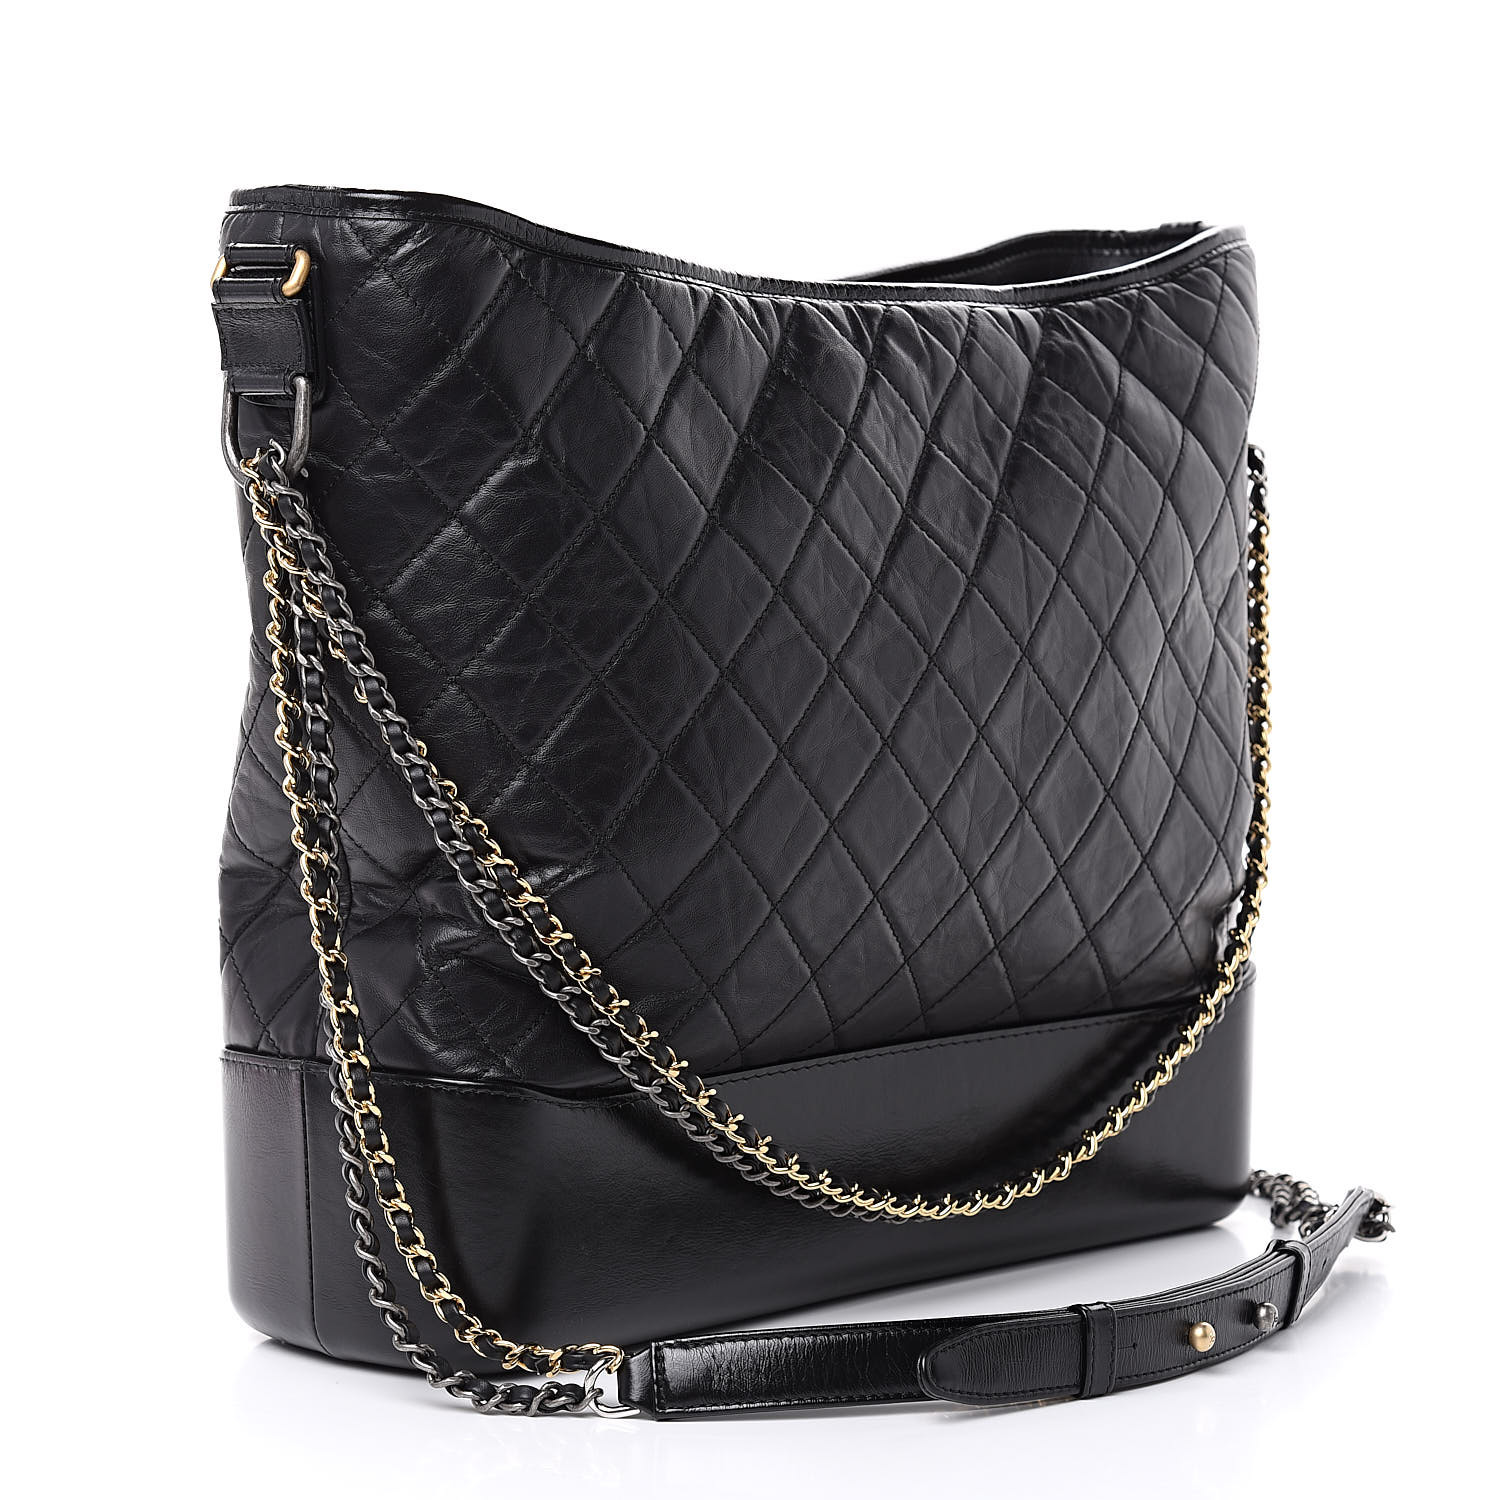 CHANEL Aged Calfskin Quilted Large Gabrielle Hobo Black 508588